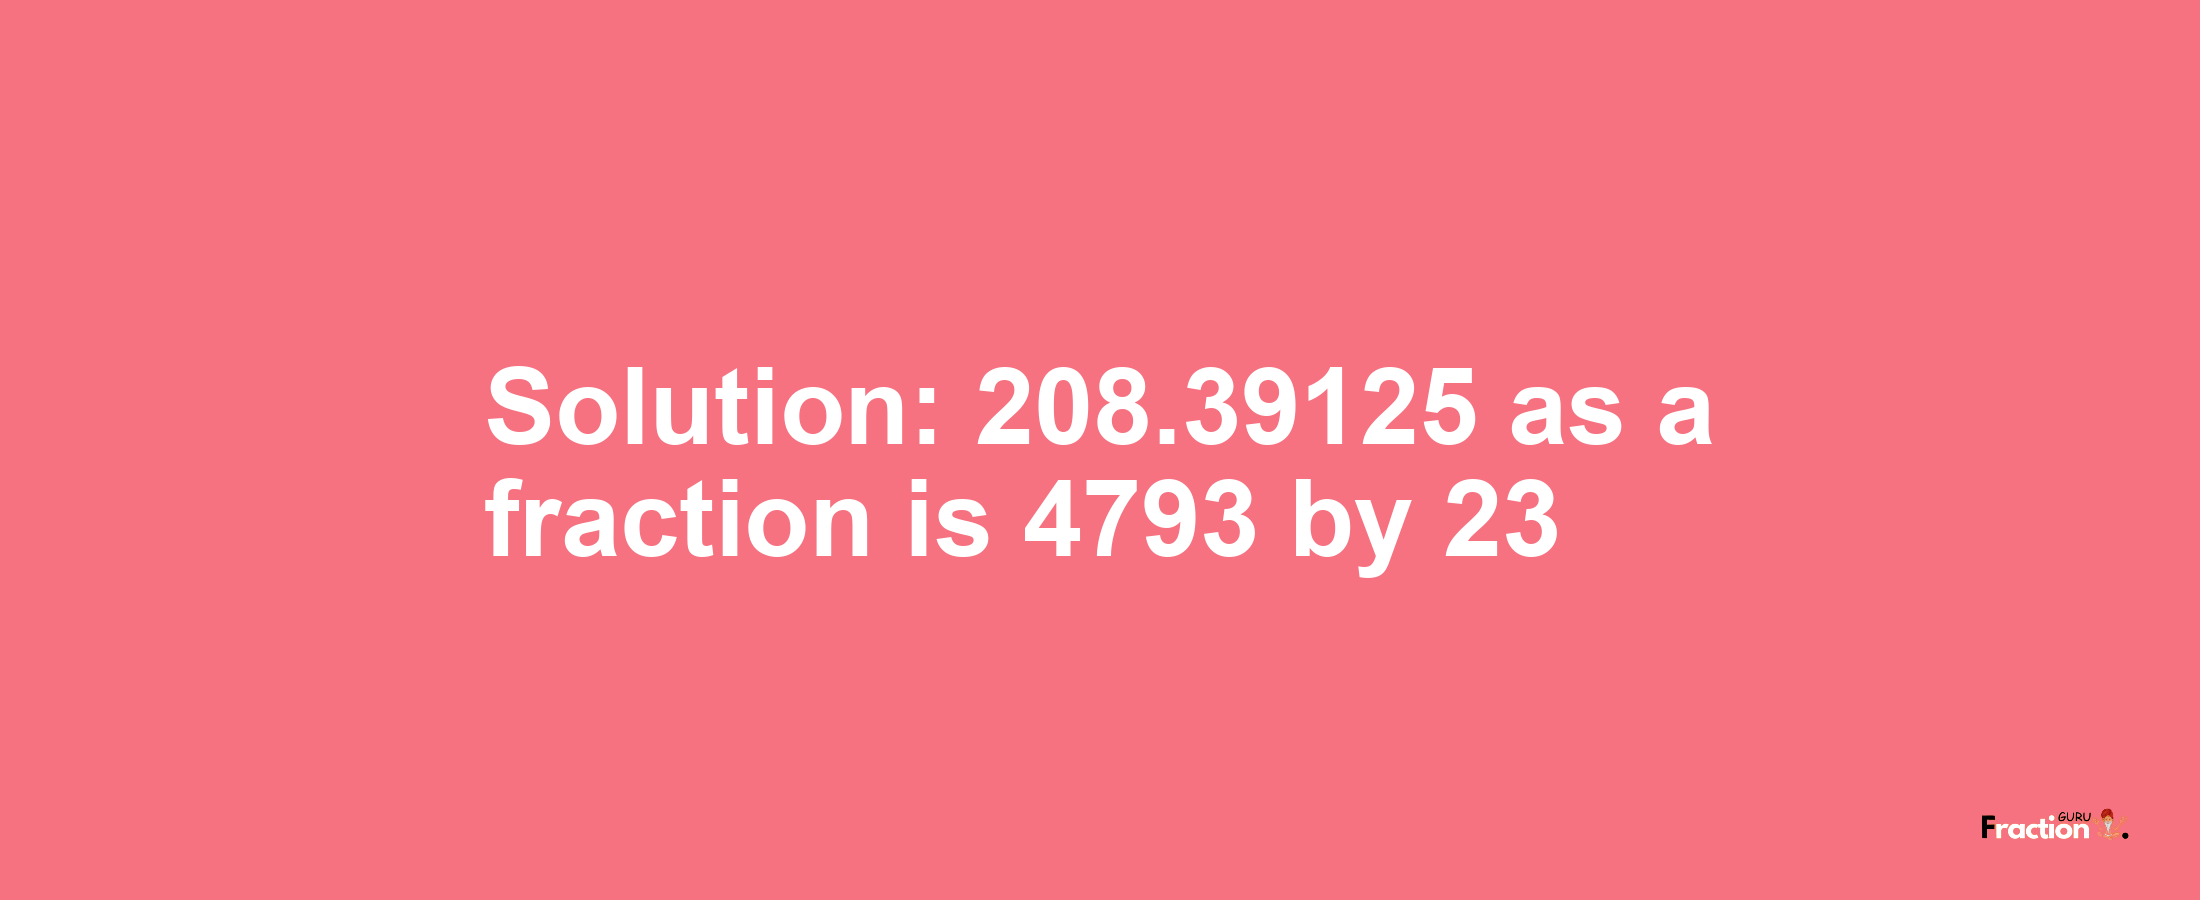 Solution:208.39125 as a fraction is 4793/23